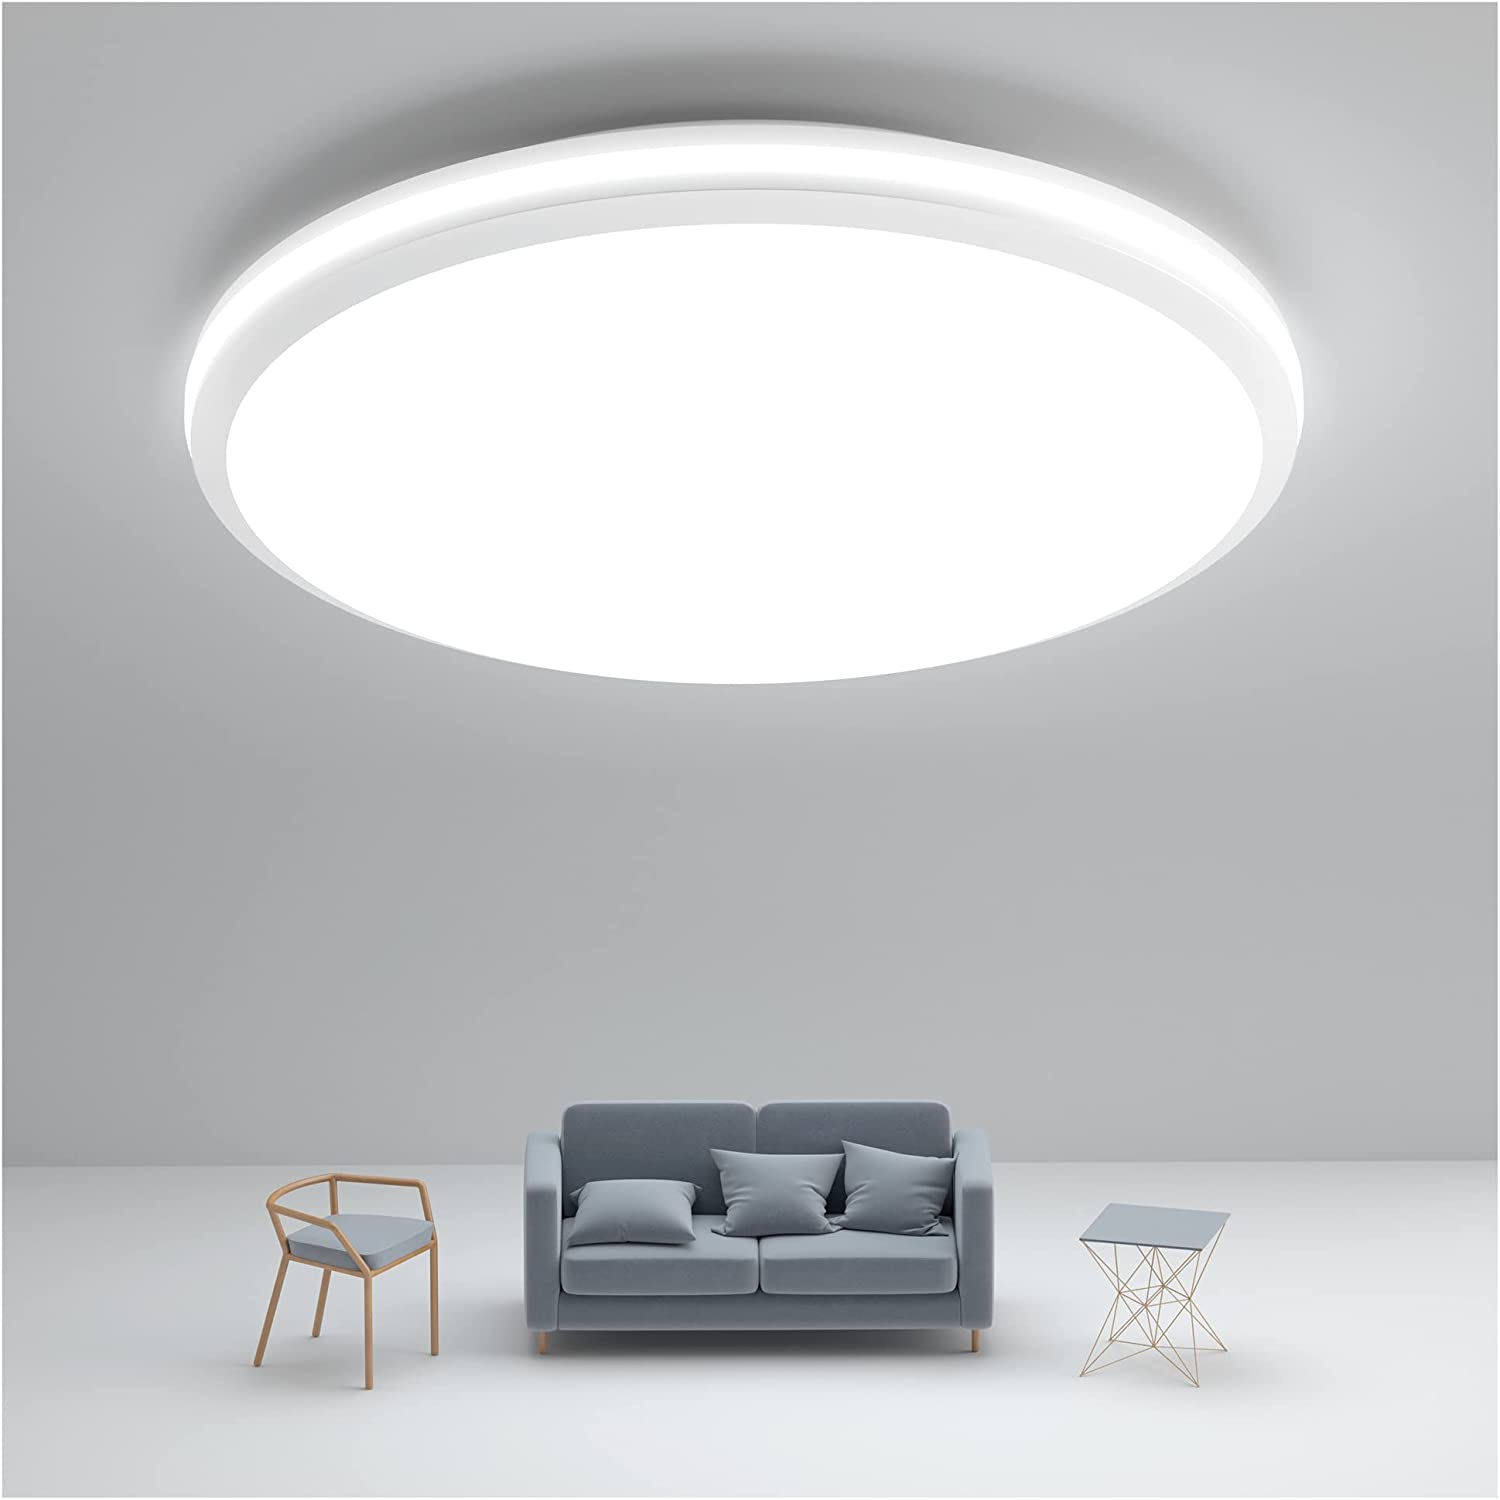 UNEEDE LED ceiling light flat round, IP54 waterproof 25W 4300LM 6500